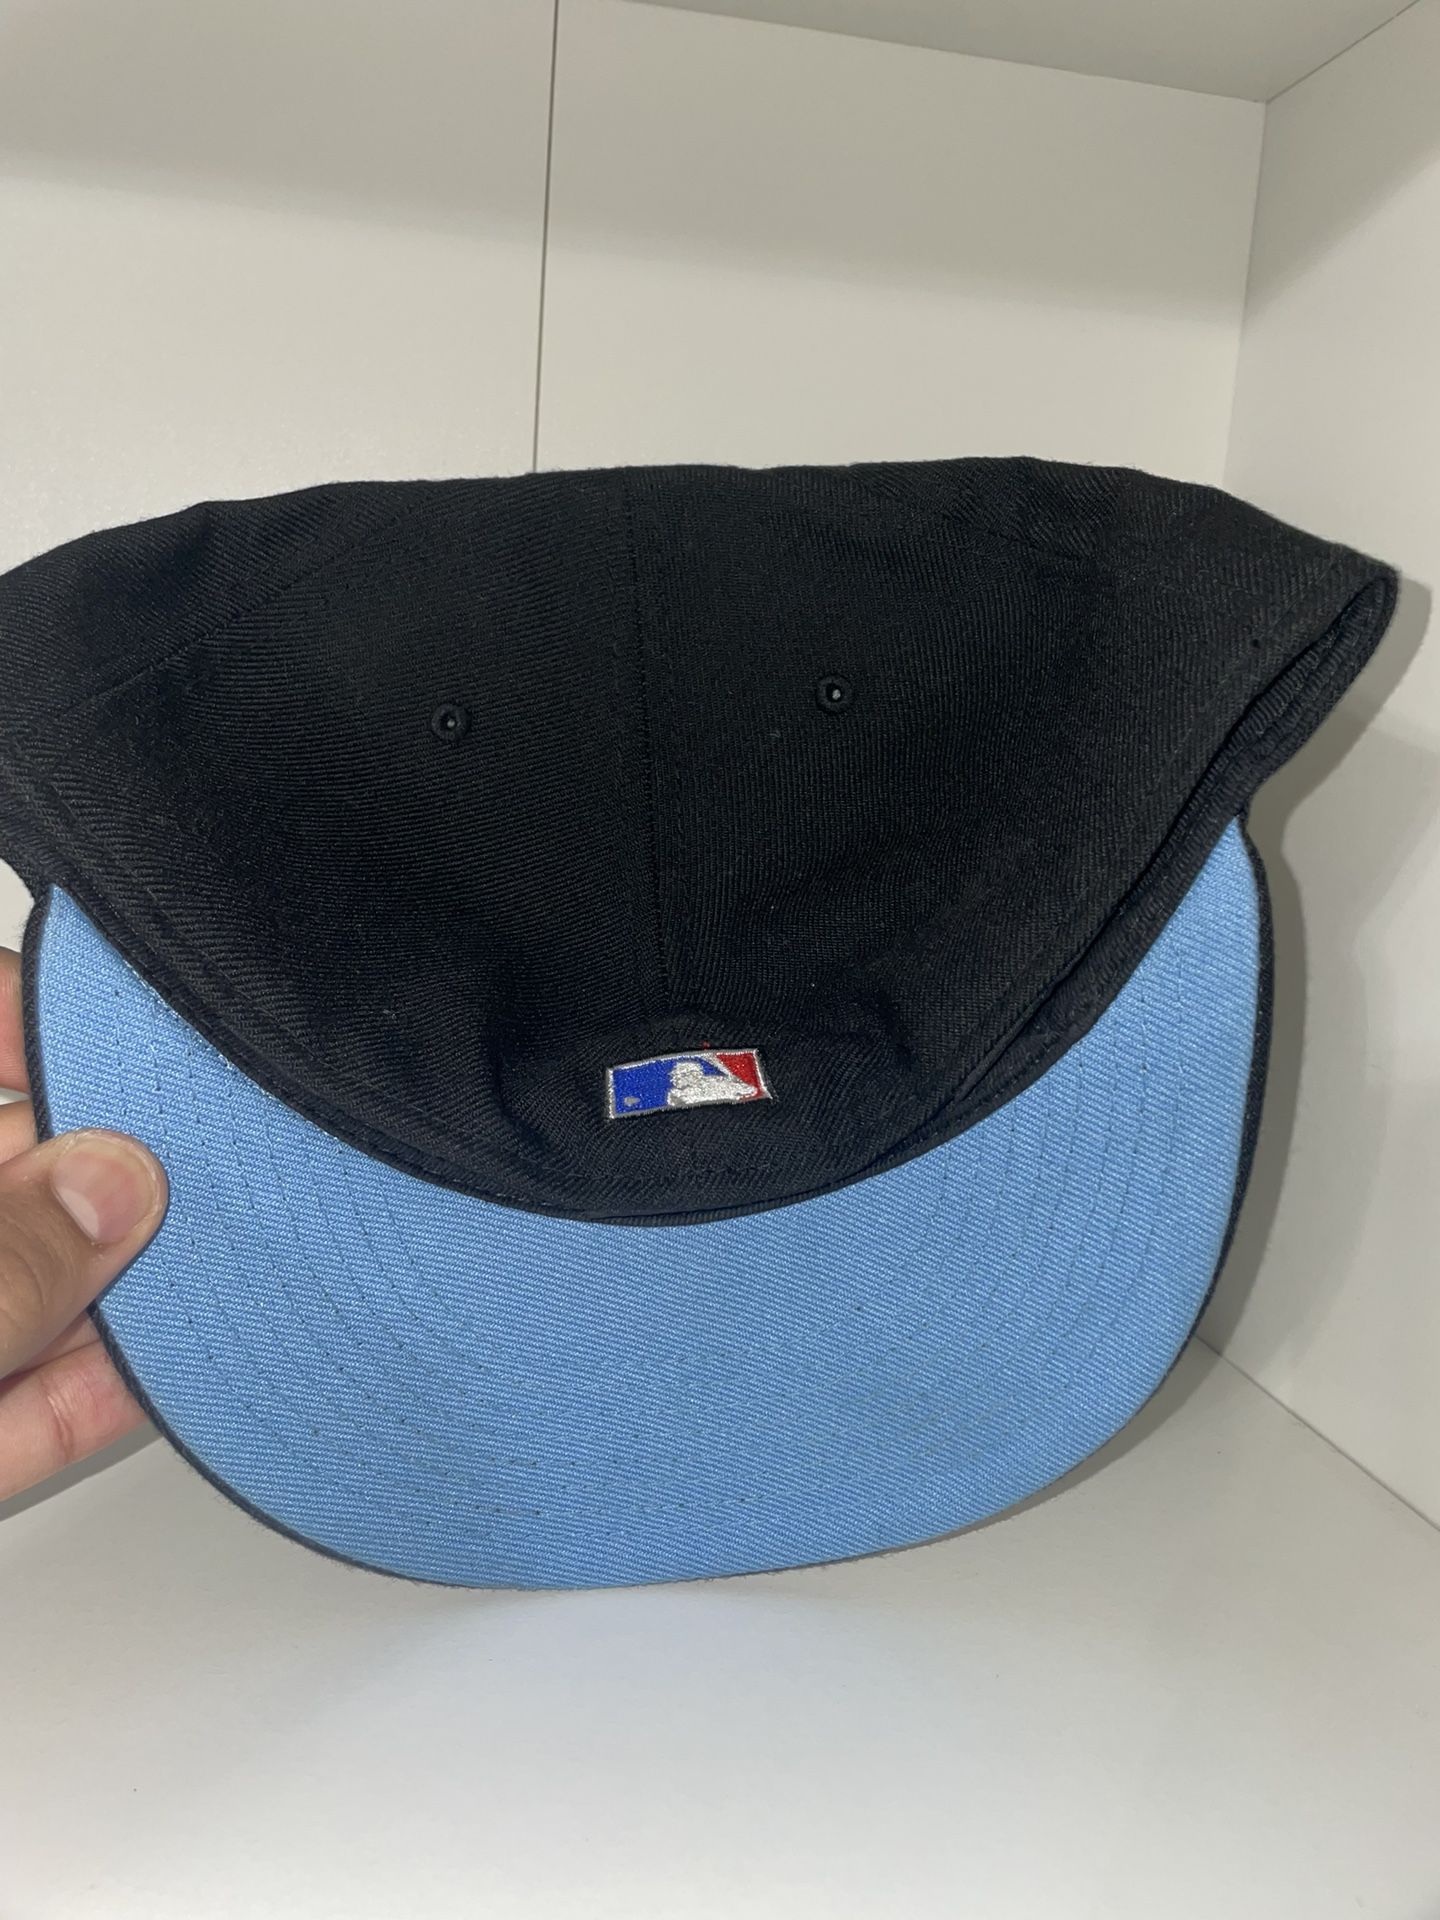 Blue Jays Fitted Hat for Sale in El Monte, CA - OfferUp